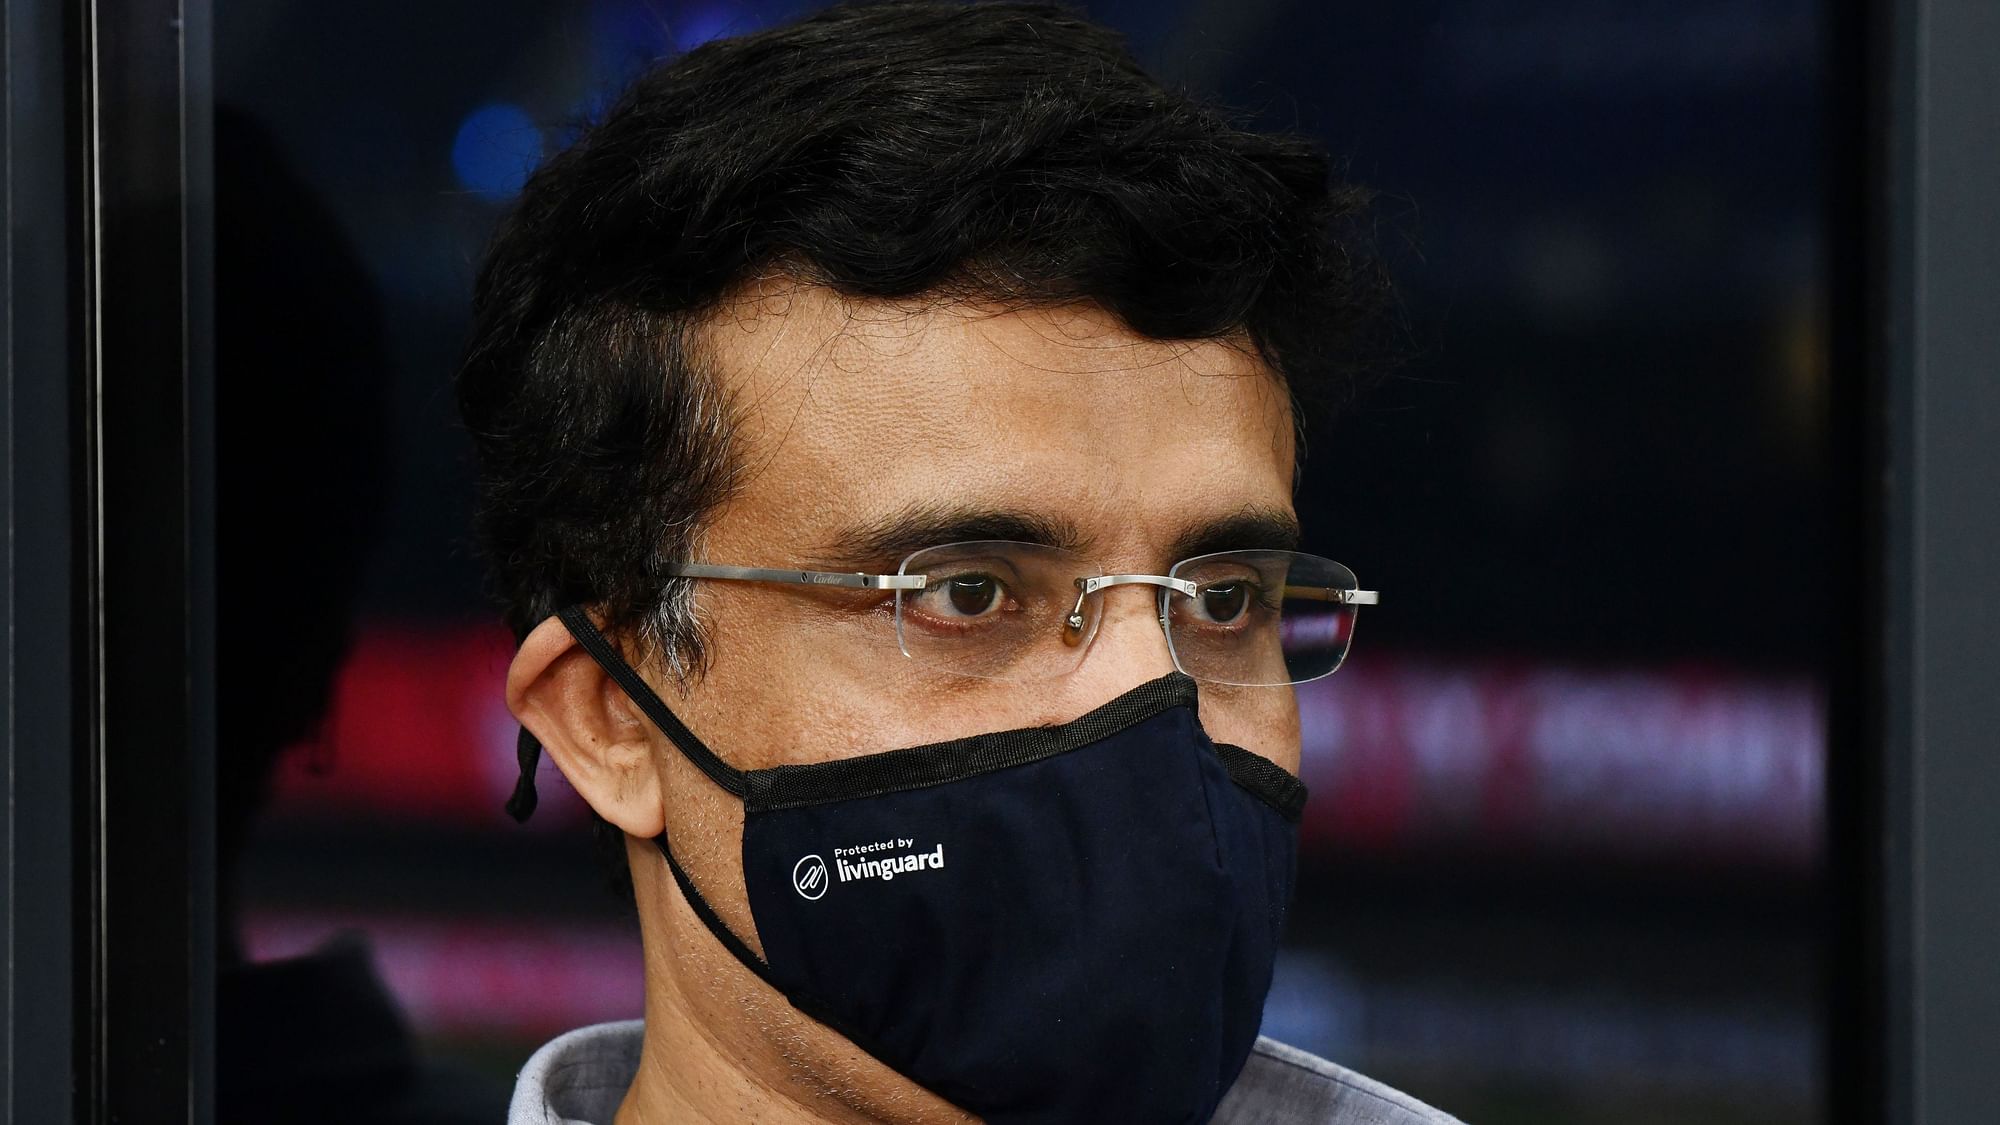 Former India captain and current BCCI president Sourav Ganguly was on Sunday discharged from the Apollo Gleneagles Hospital after undergoing a second round of angioplasty.